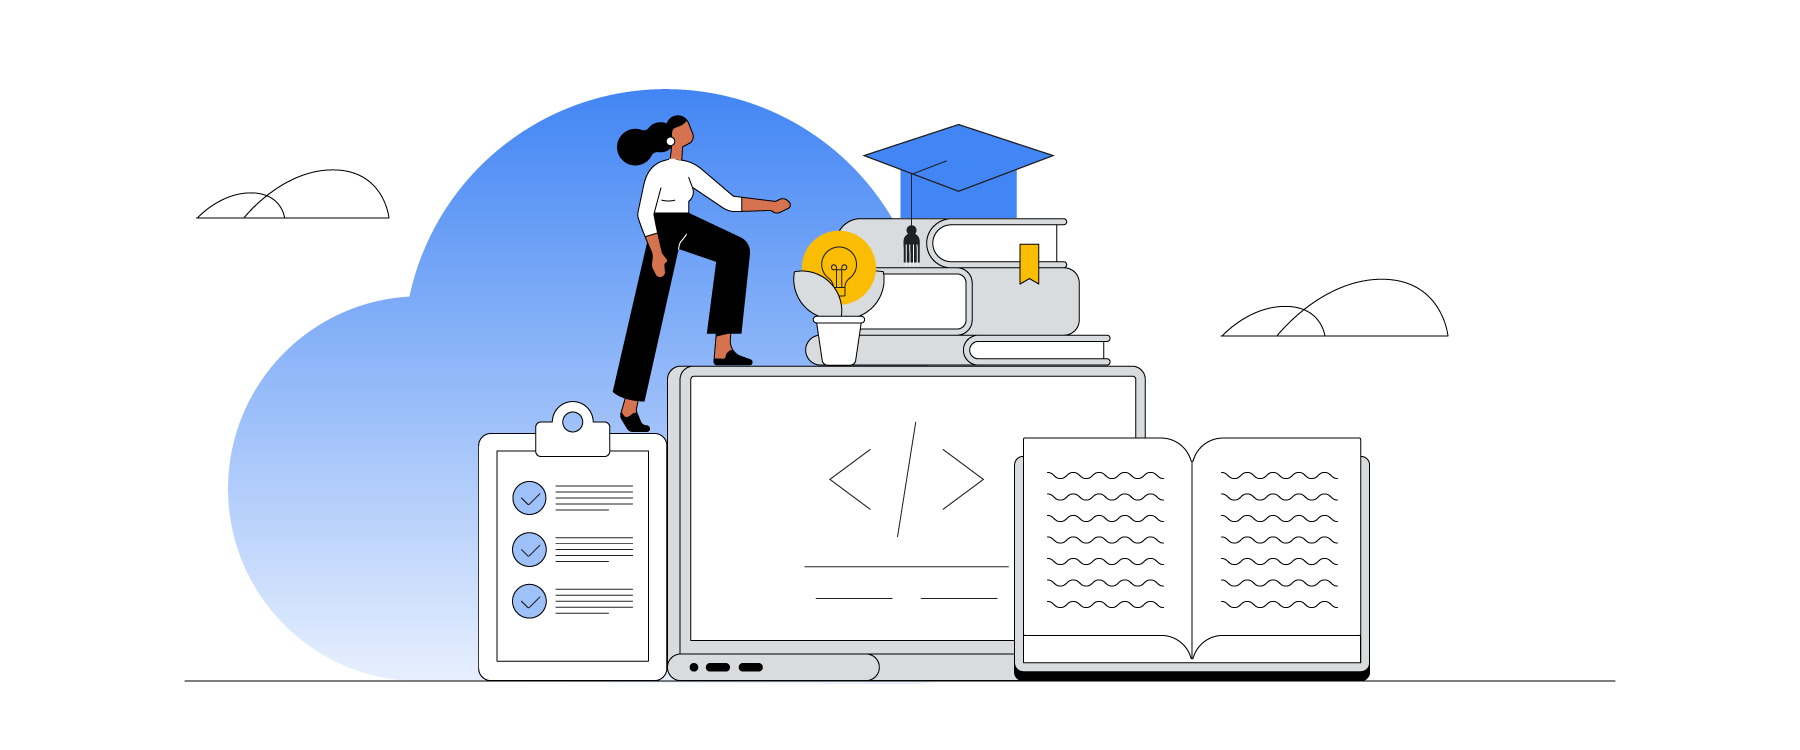 https://storage.googleapis.com/gweb-cloudblog-publish/images/Why_Higher_Ed_Needs_to_Go_All-in_on_Digita.max-1800x1800_jtoqrHI.png